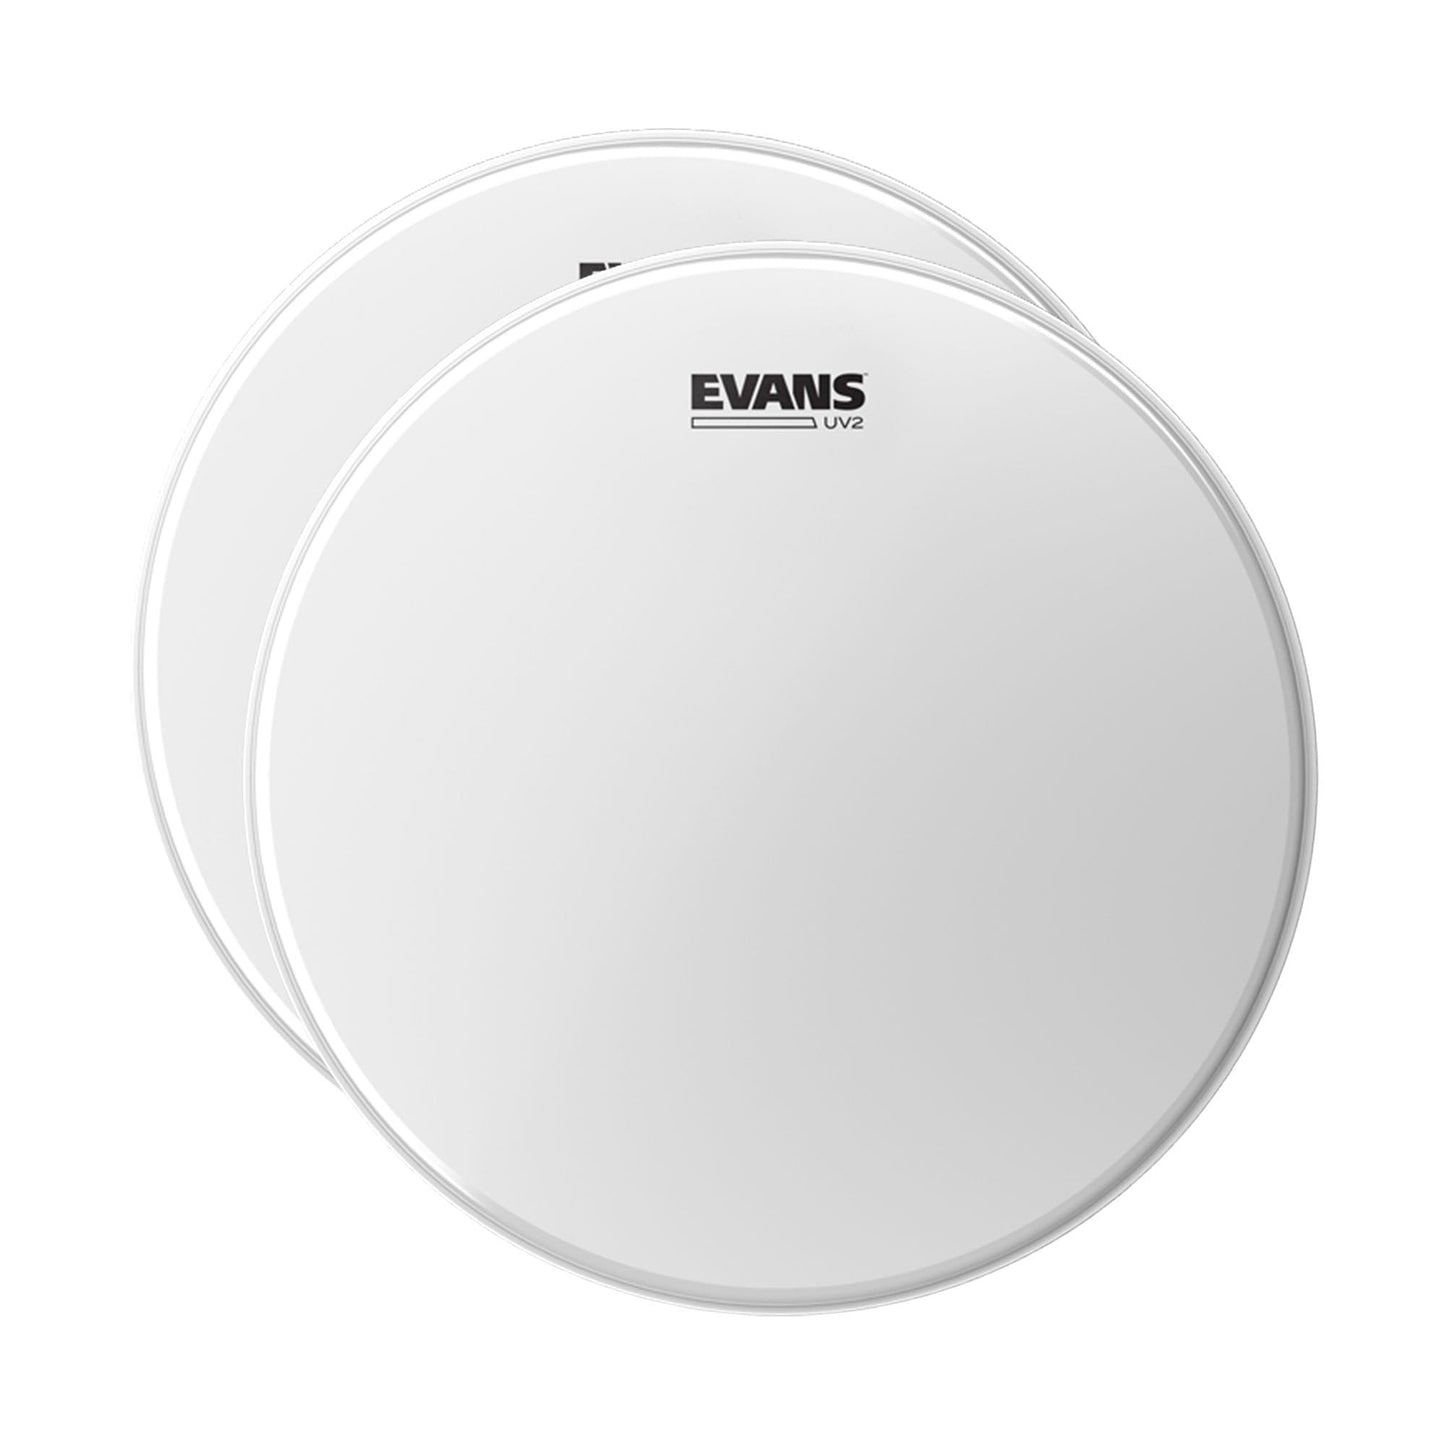 Evans 18" UV2 Coated Drum Head (2 Pack Bundle) Drums and Percussion / Parts and Accessories / Heads